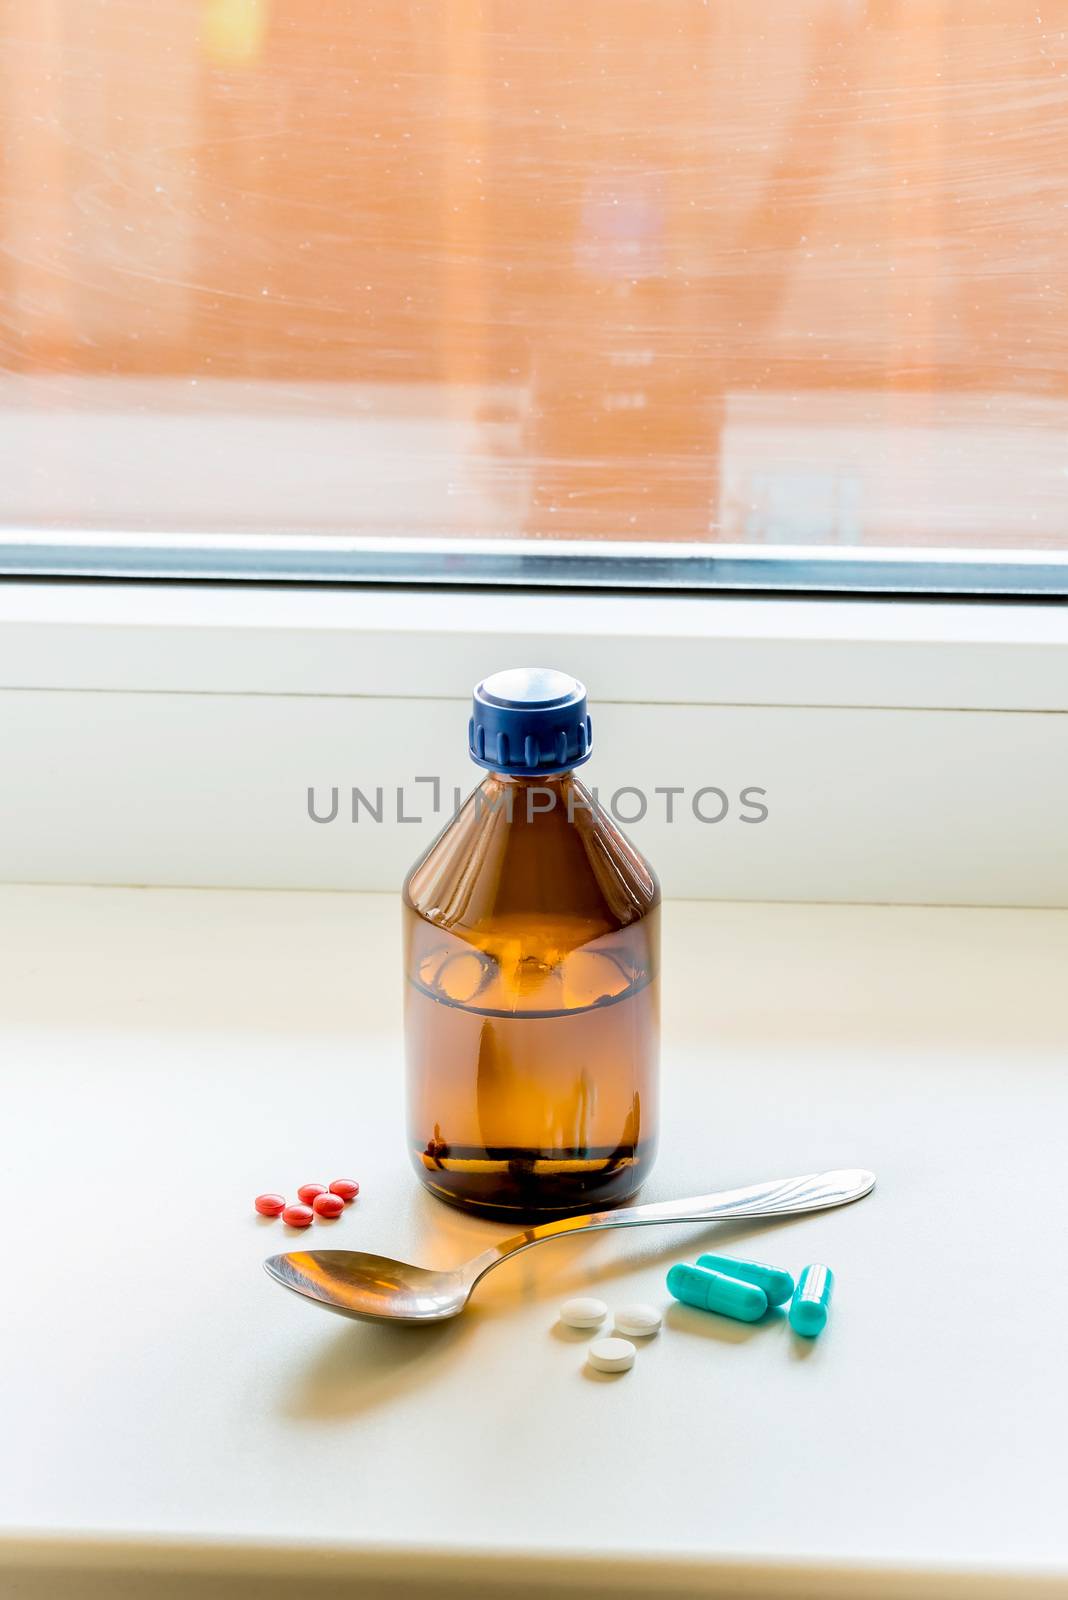 A cough syrup bottle with a spoon and some pills on the table close to the window